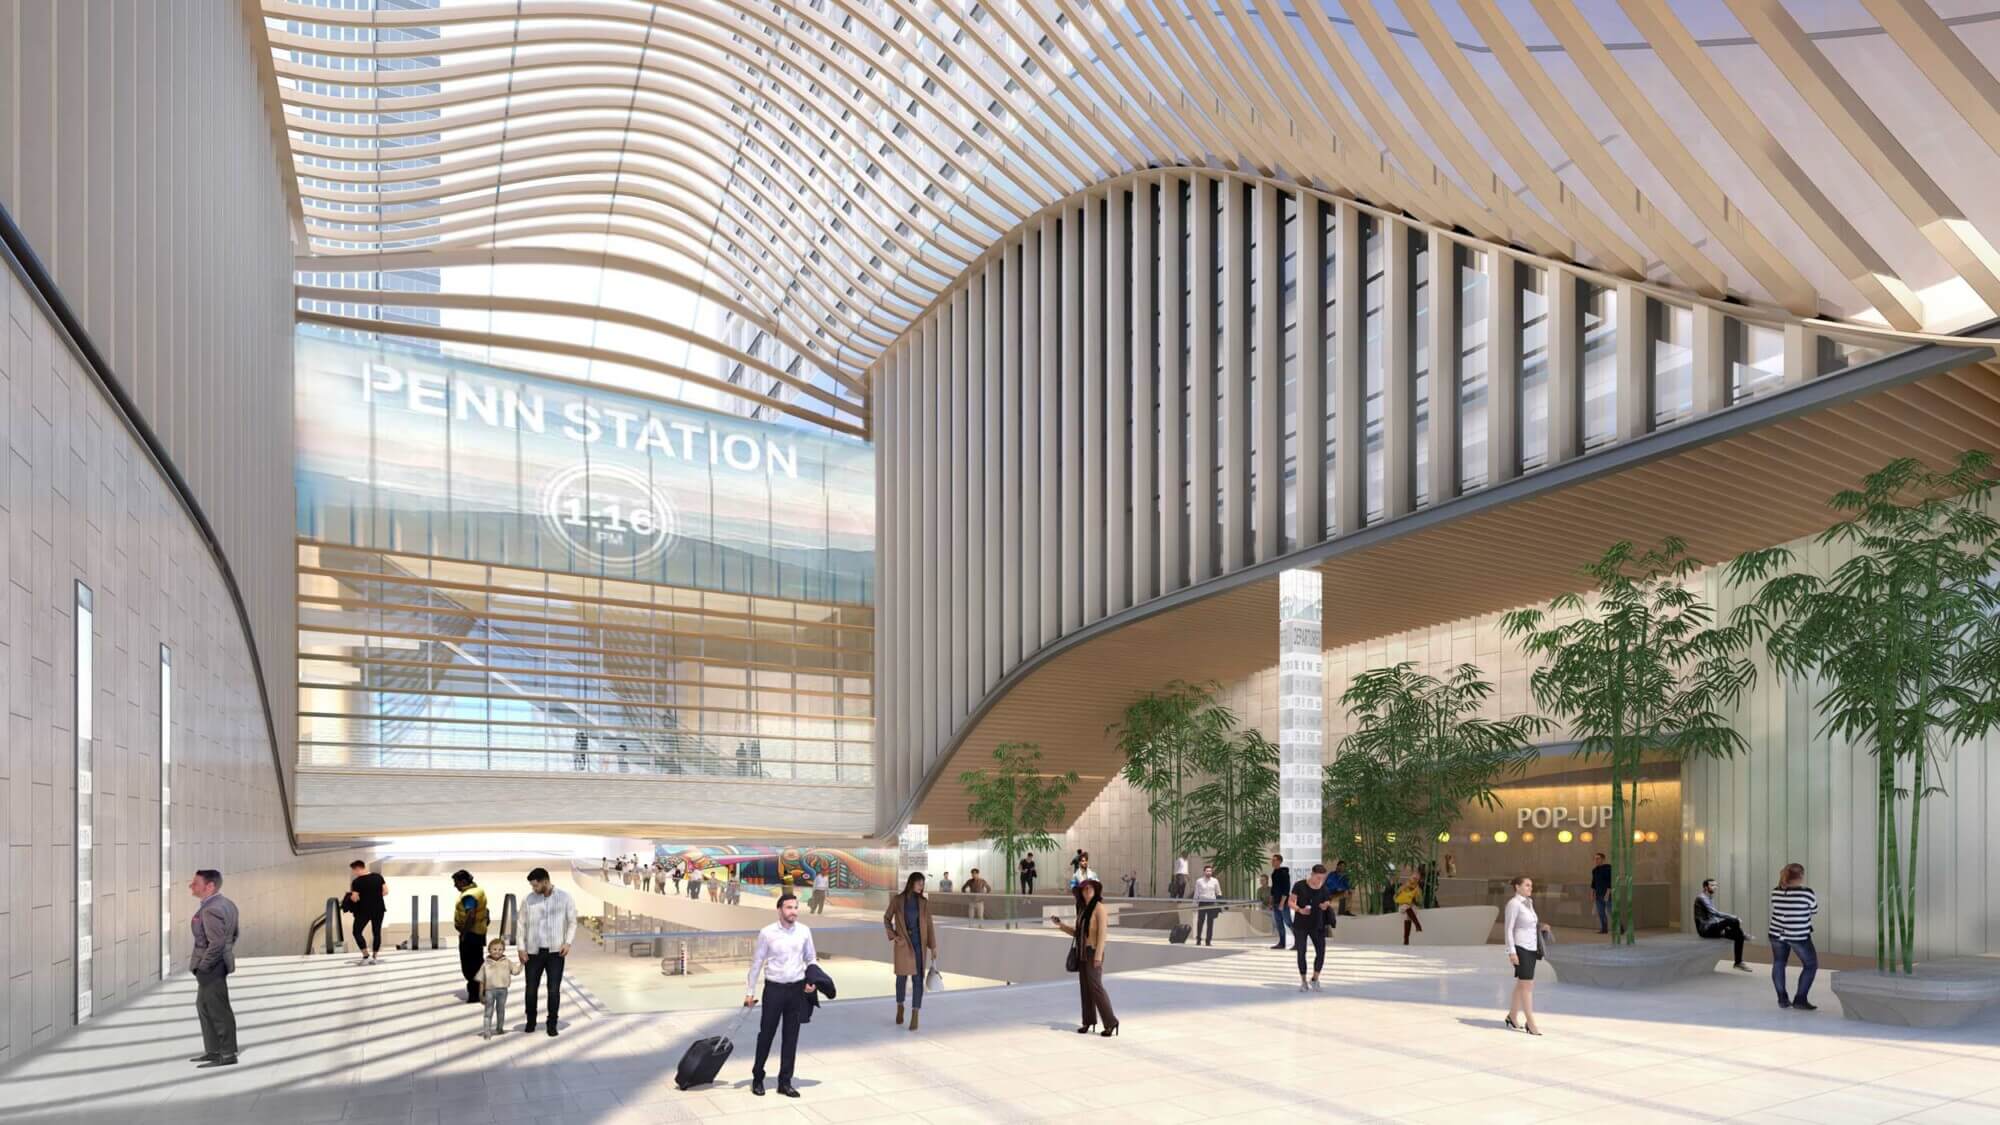 A proposal by ASTM Group, HOK, and PAU for Penn Station